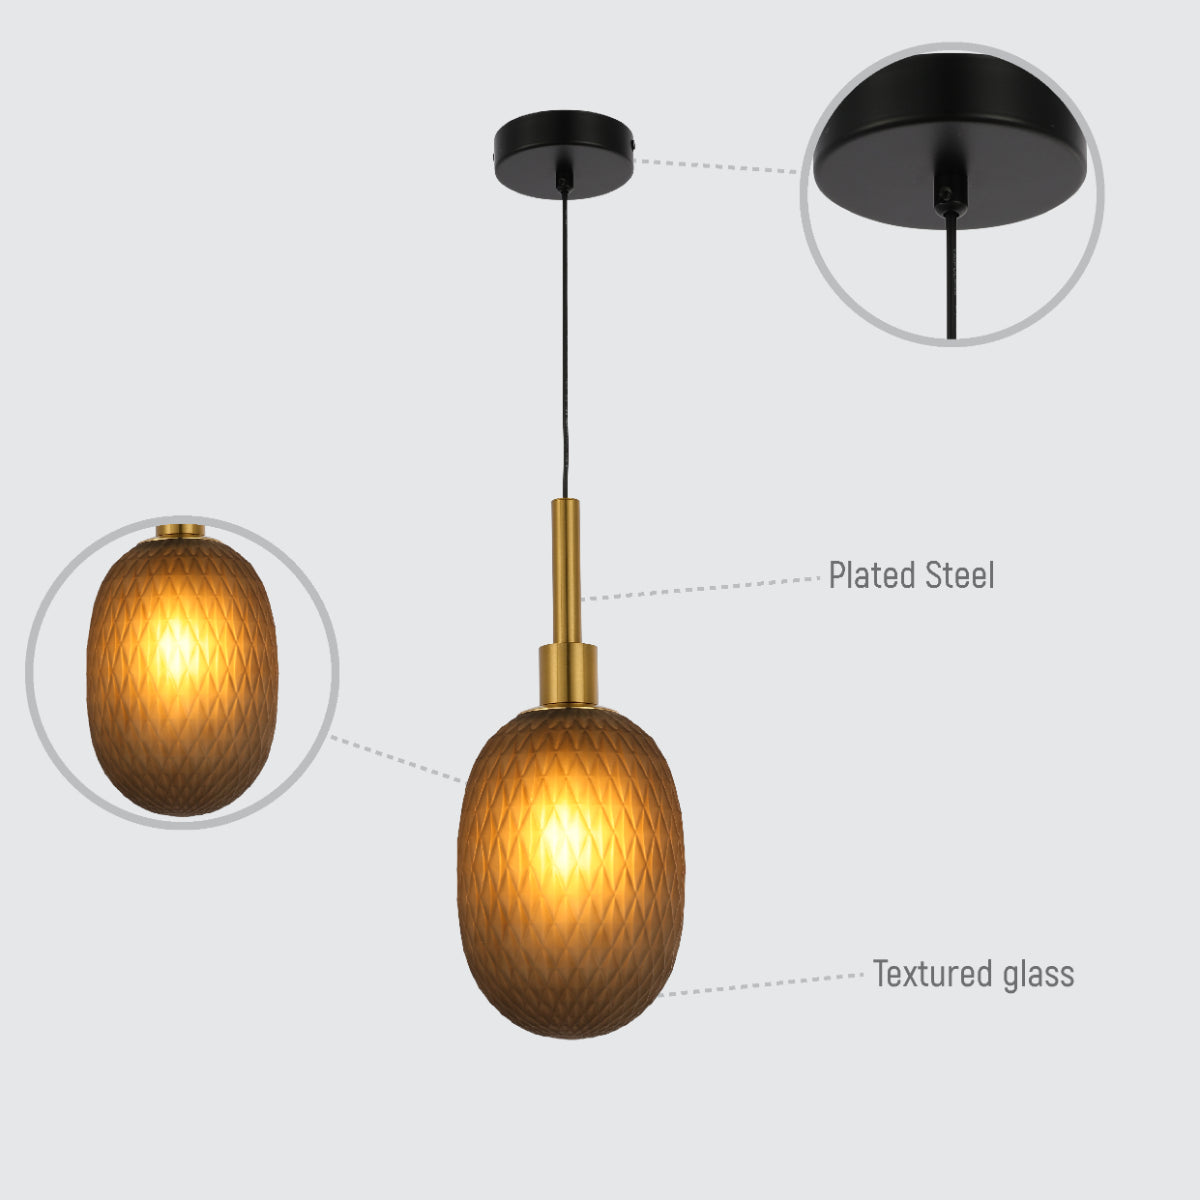 Lighting properties of Opalescent Ellipsoid Pendant Light with Gold Detail 150-19018